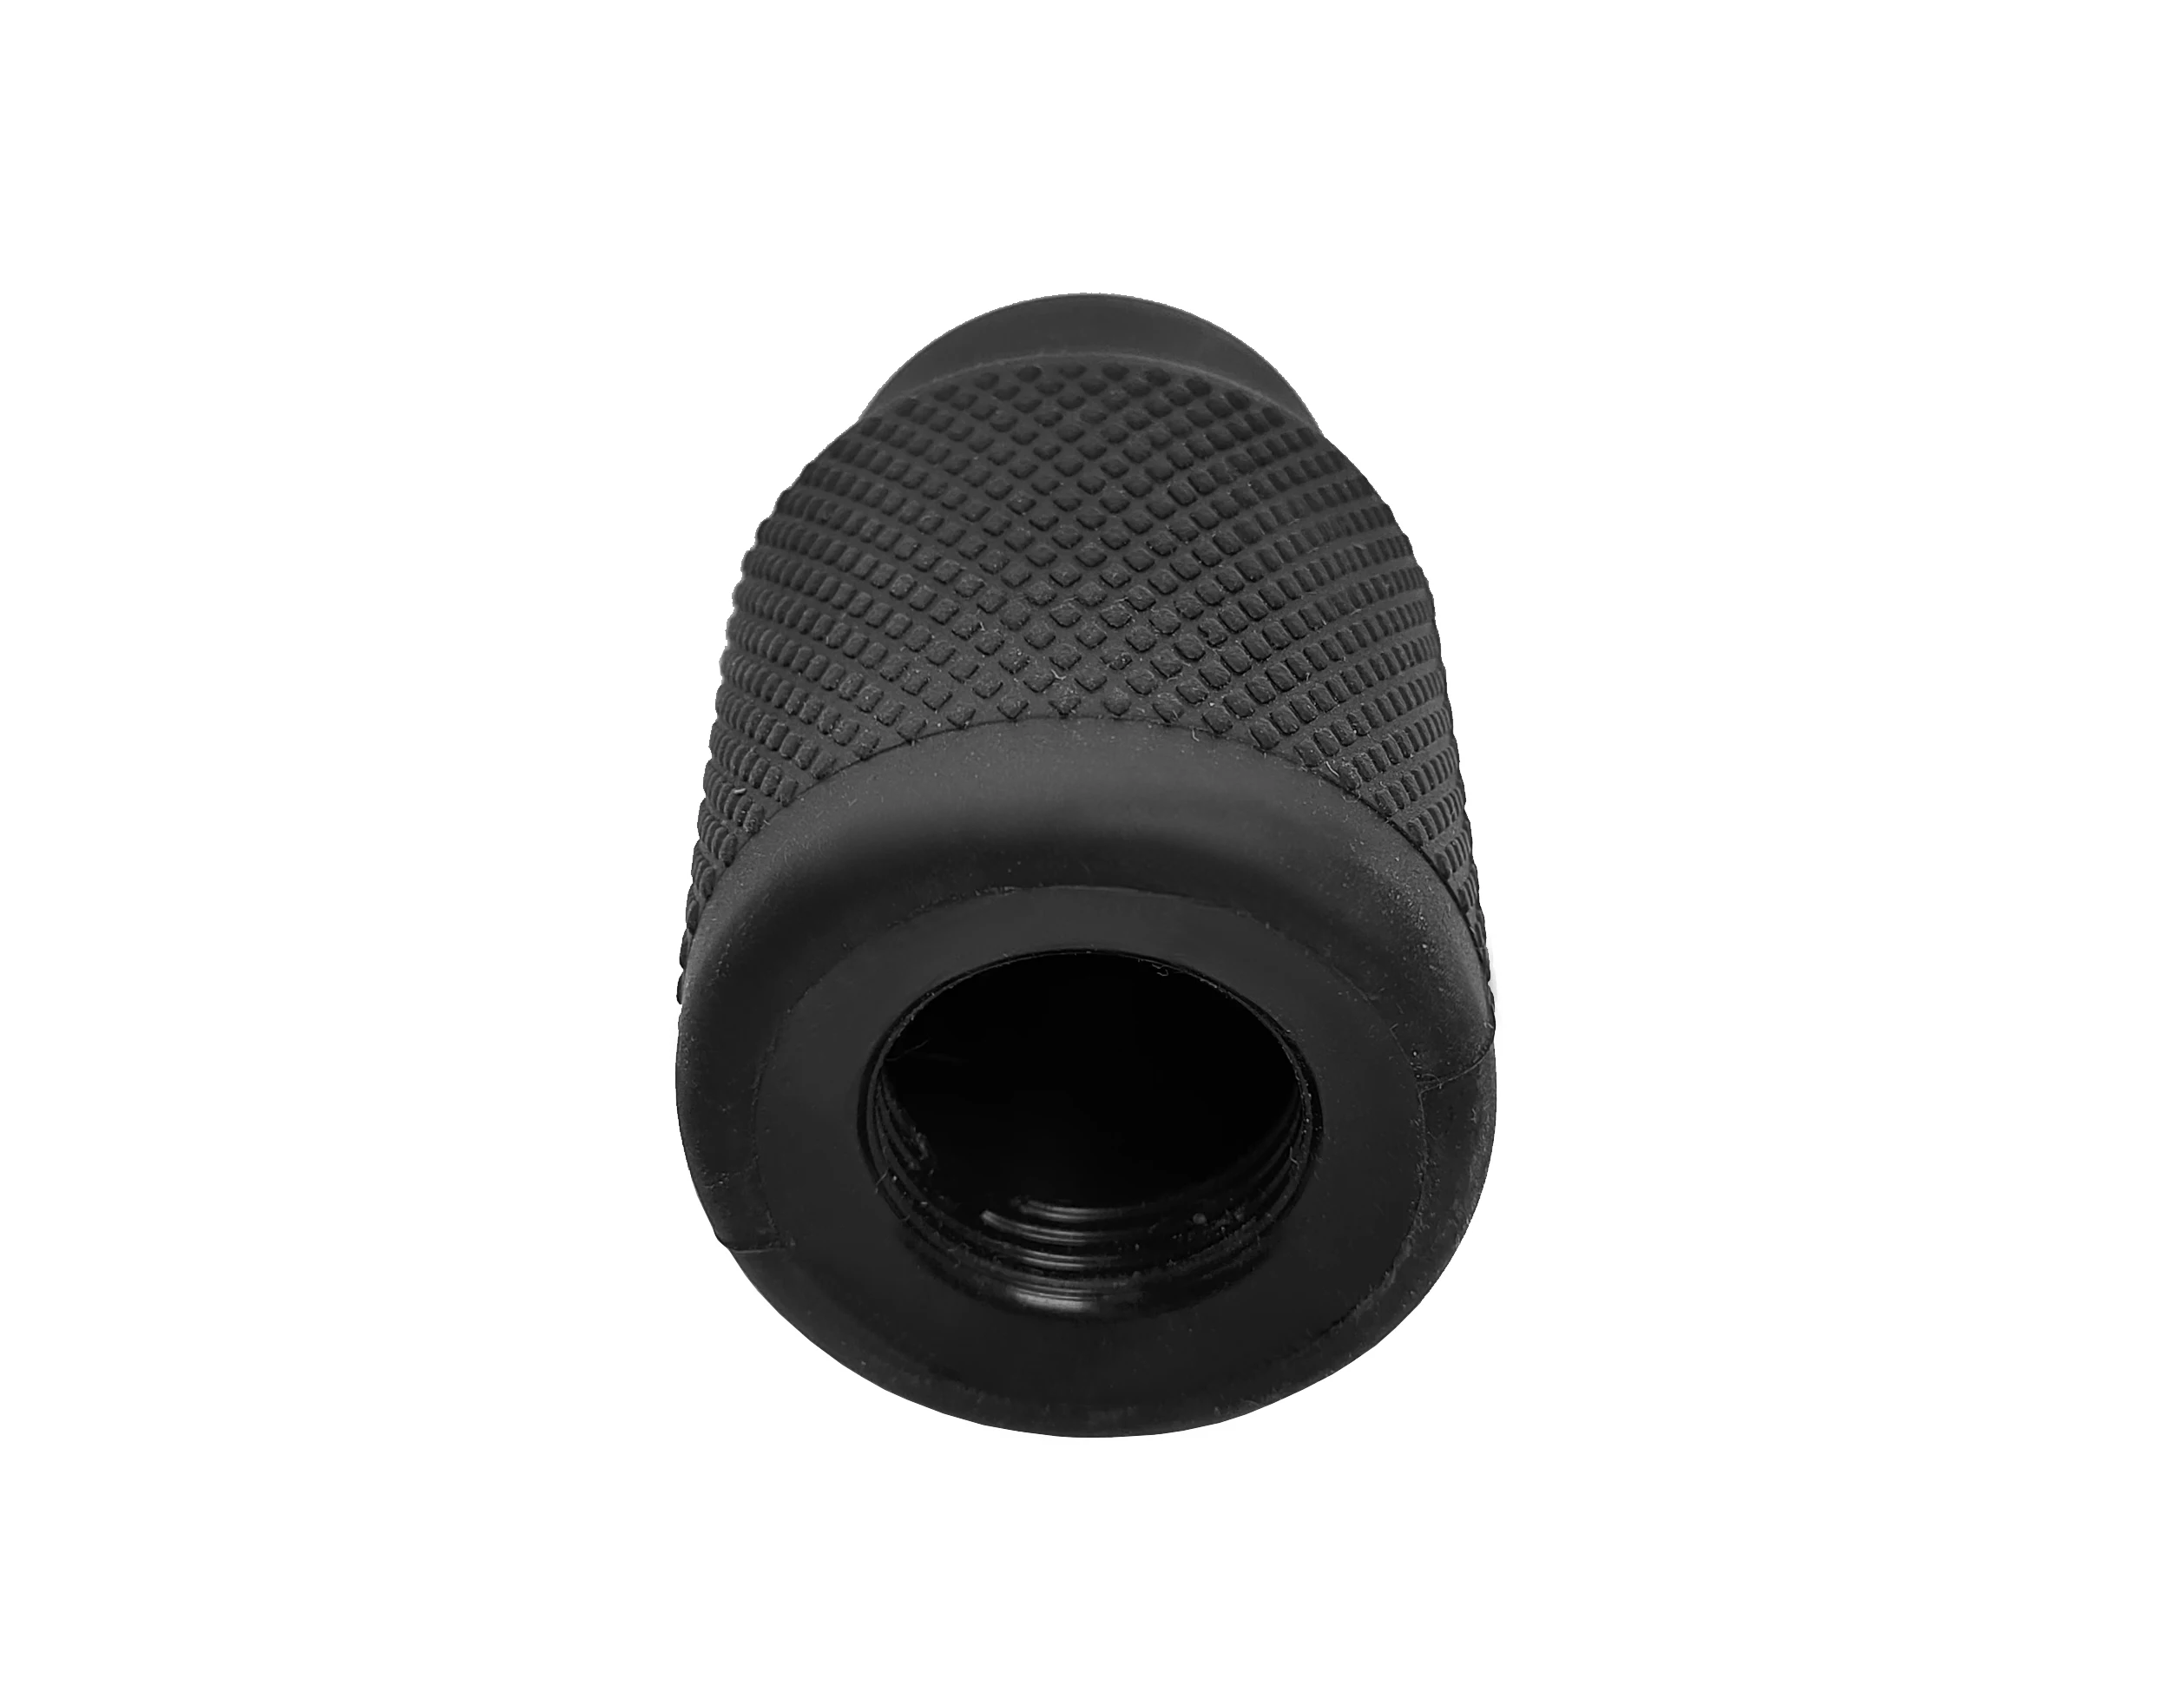 cable waterproof silicone connector for 7/16 din connector for 1/2 SF cable rubber Boots details